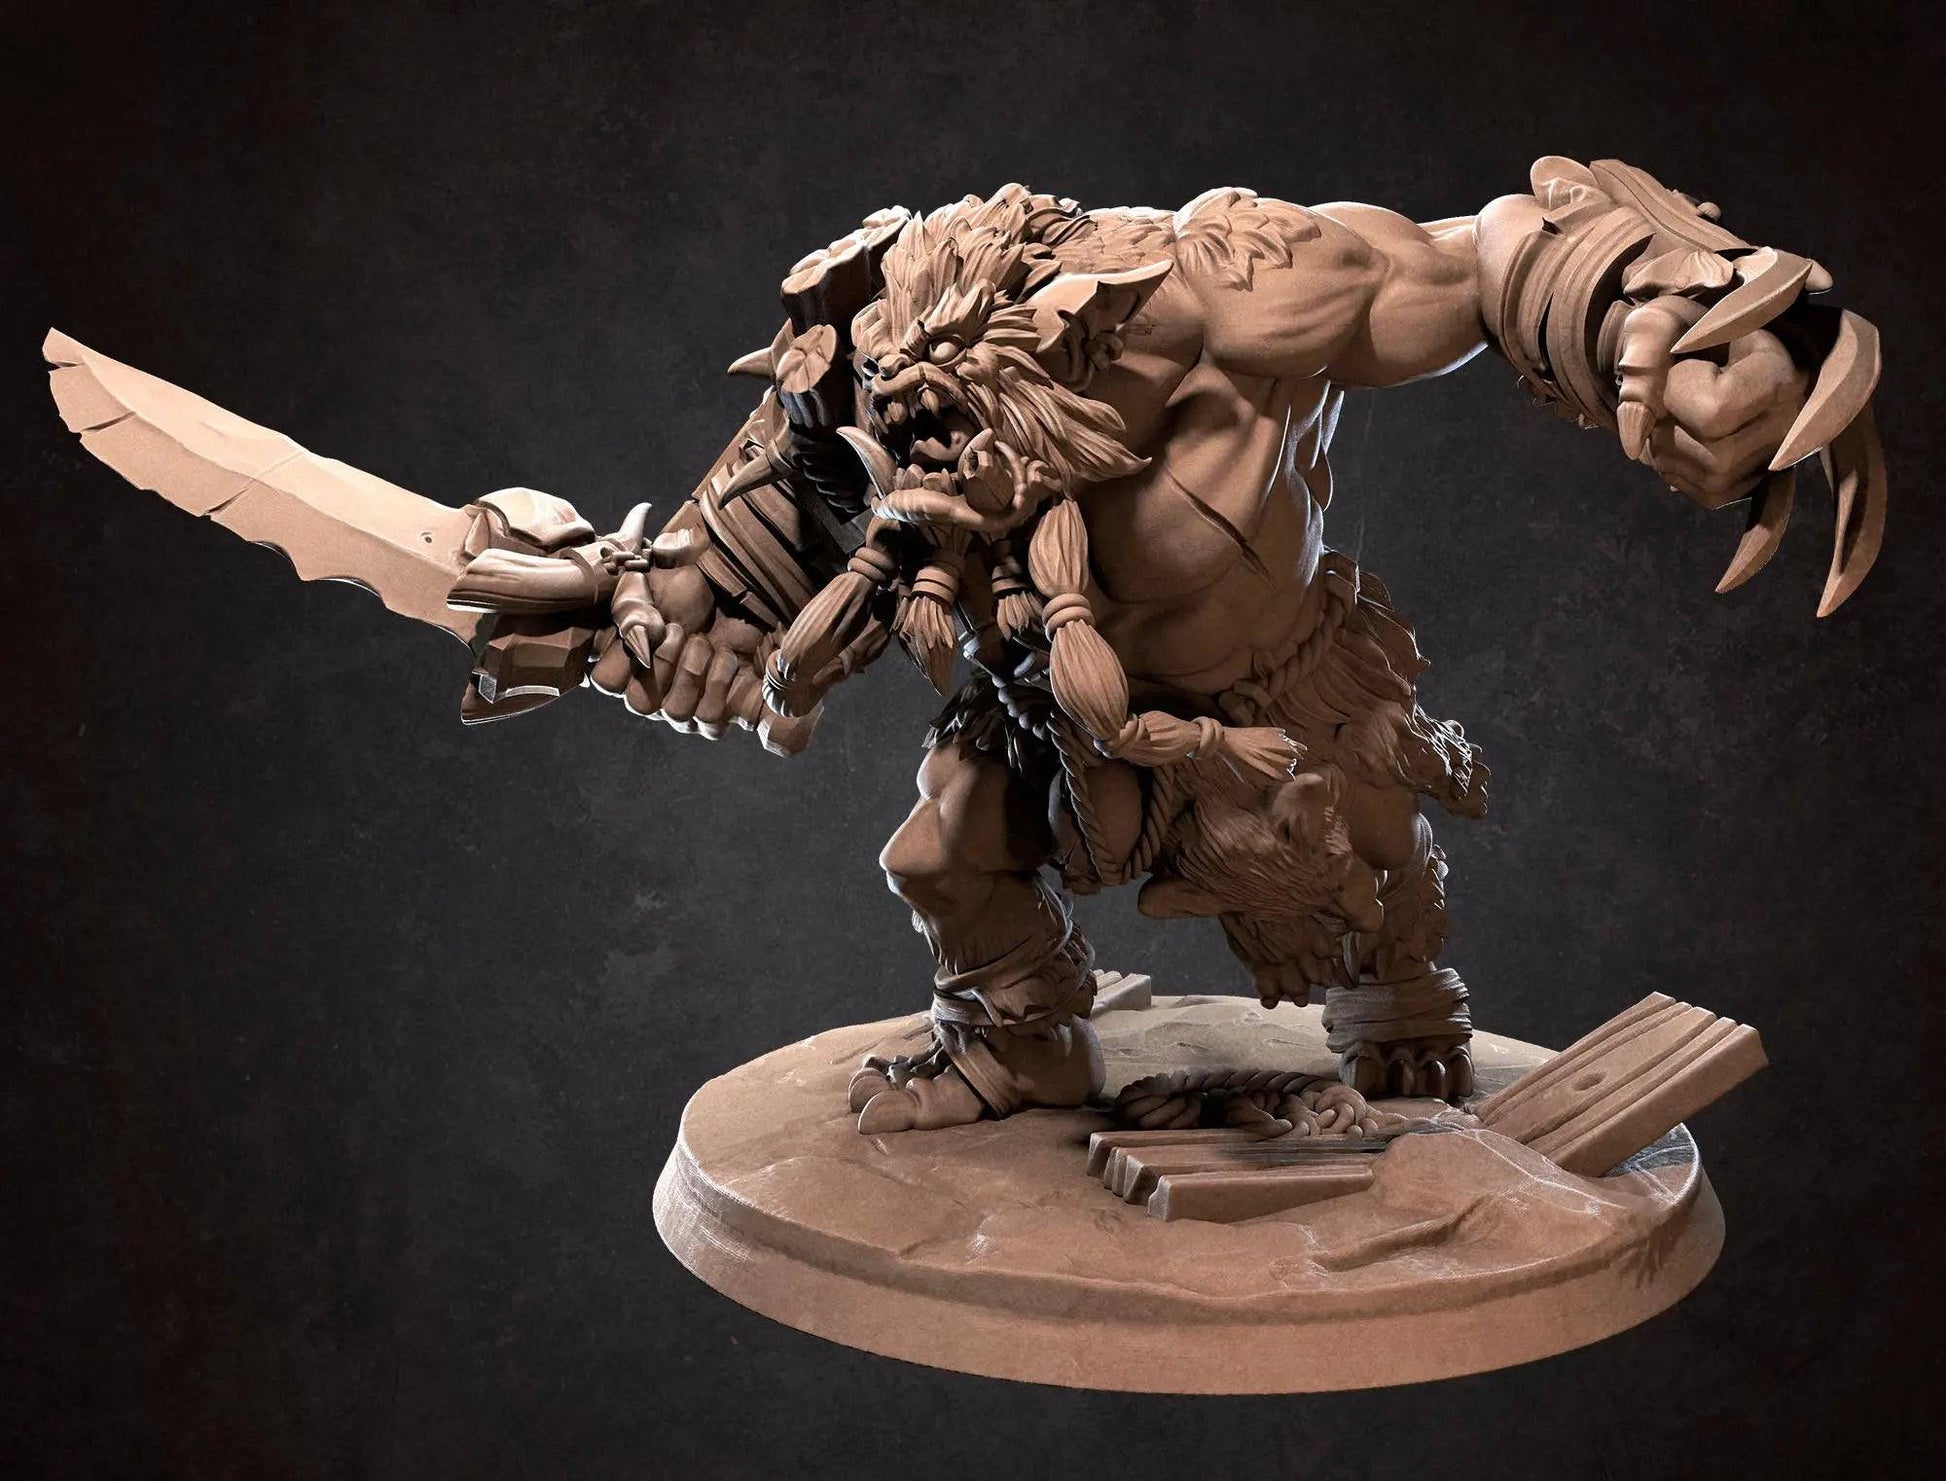 Zhurk, Bugbear Boss with Two Weapons | D&D Miniature TTRPG Character | Bite the Bullet - Tattles Told 3D